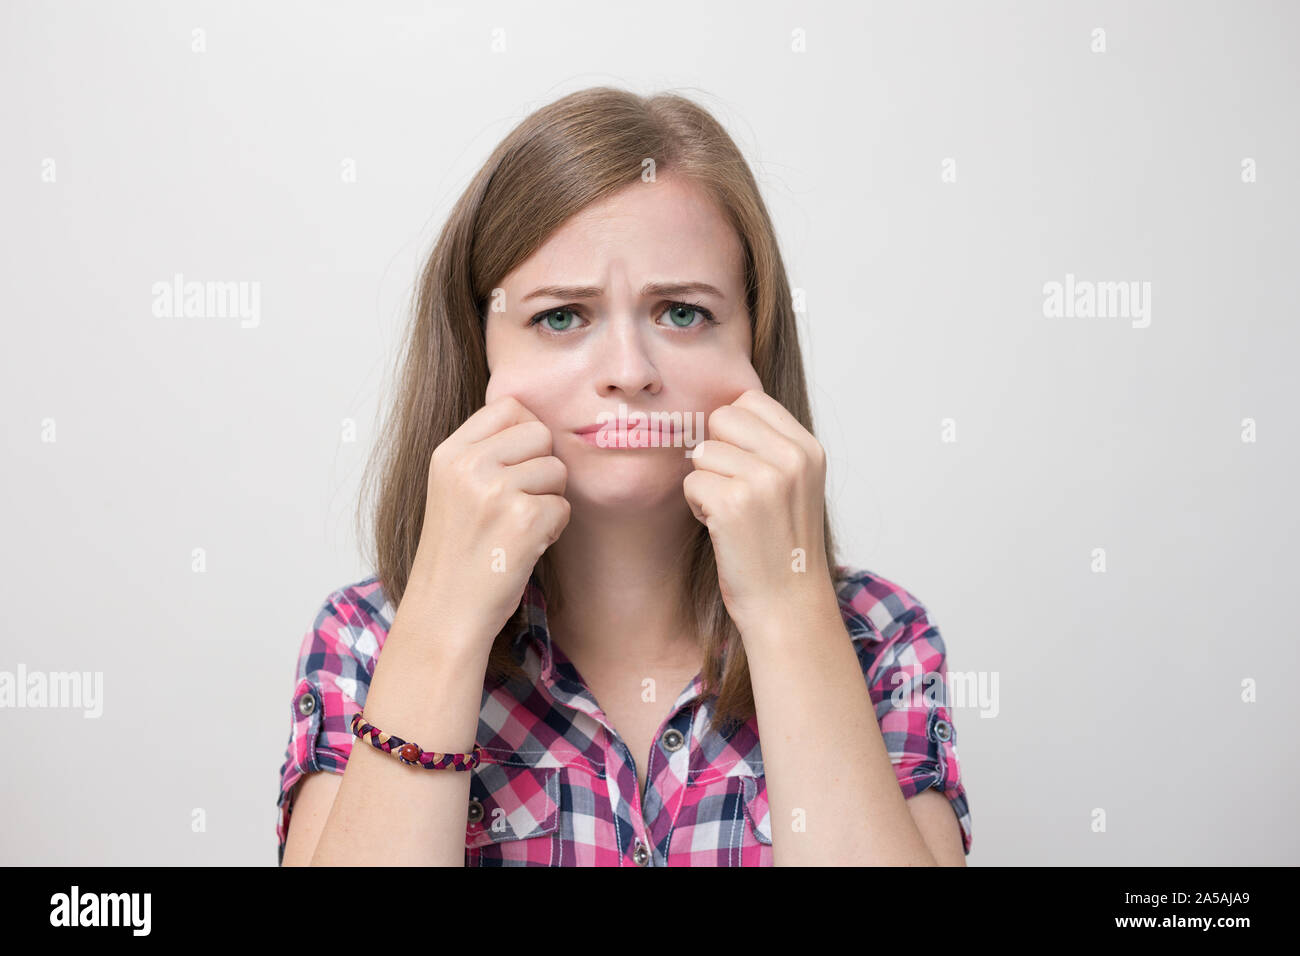 Young caucasian woman girl with chubby fat cheeks Stock Photo